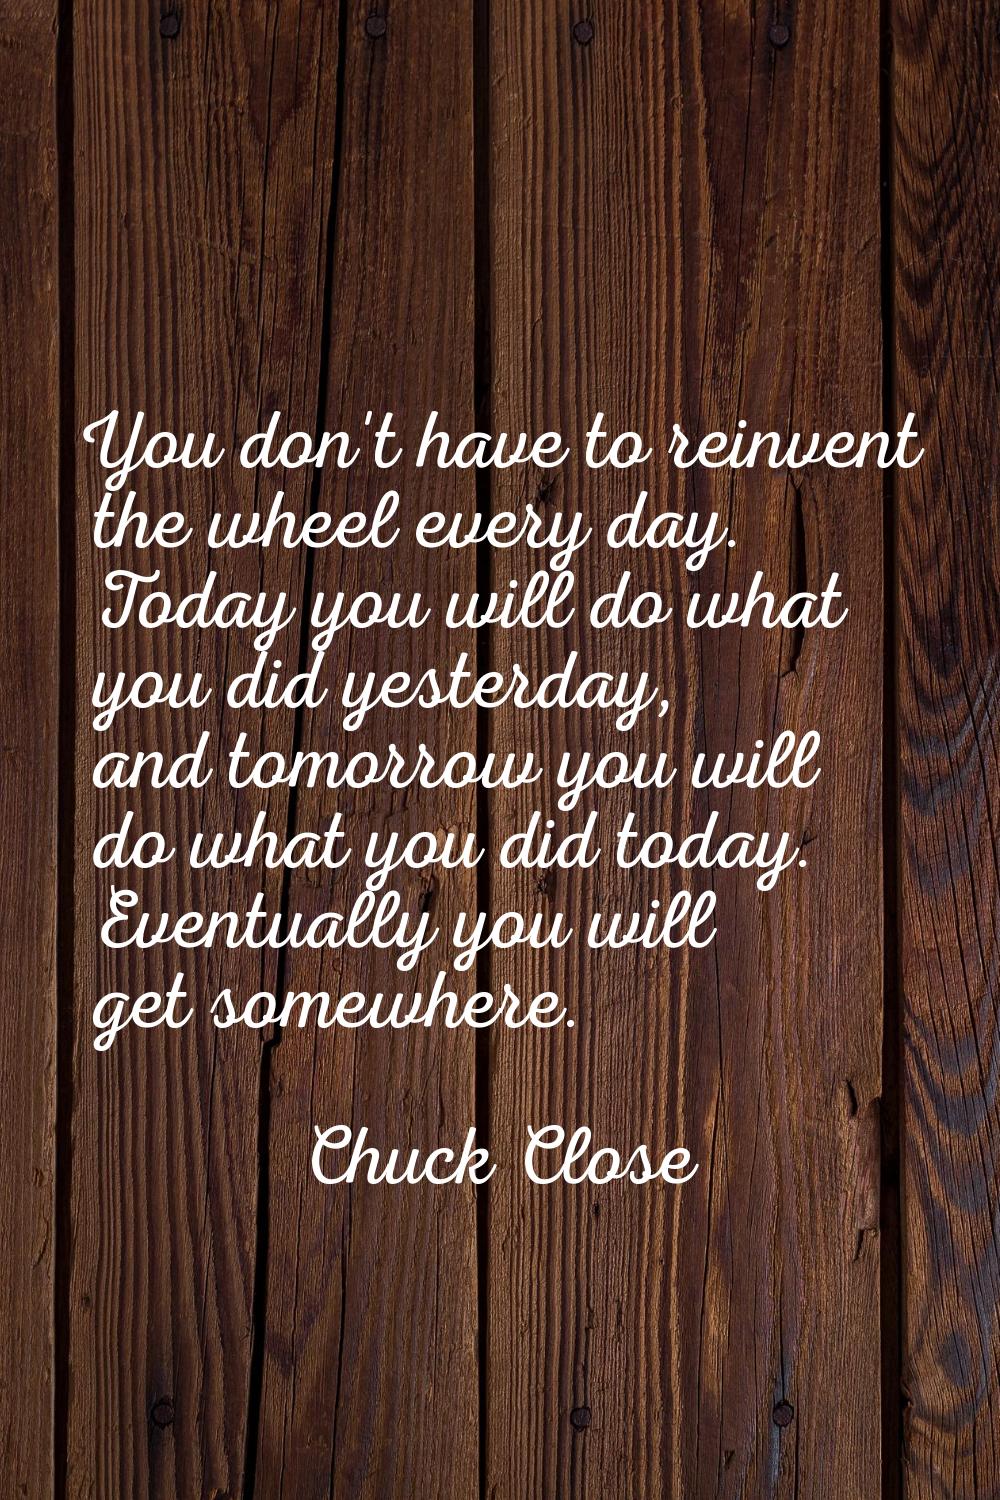 You don't have to reinvent the wheel every day. Today you will do what you did yesterday, and tomor